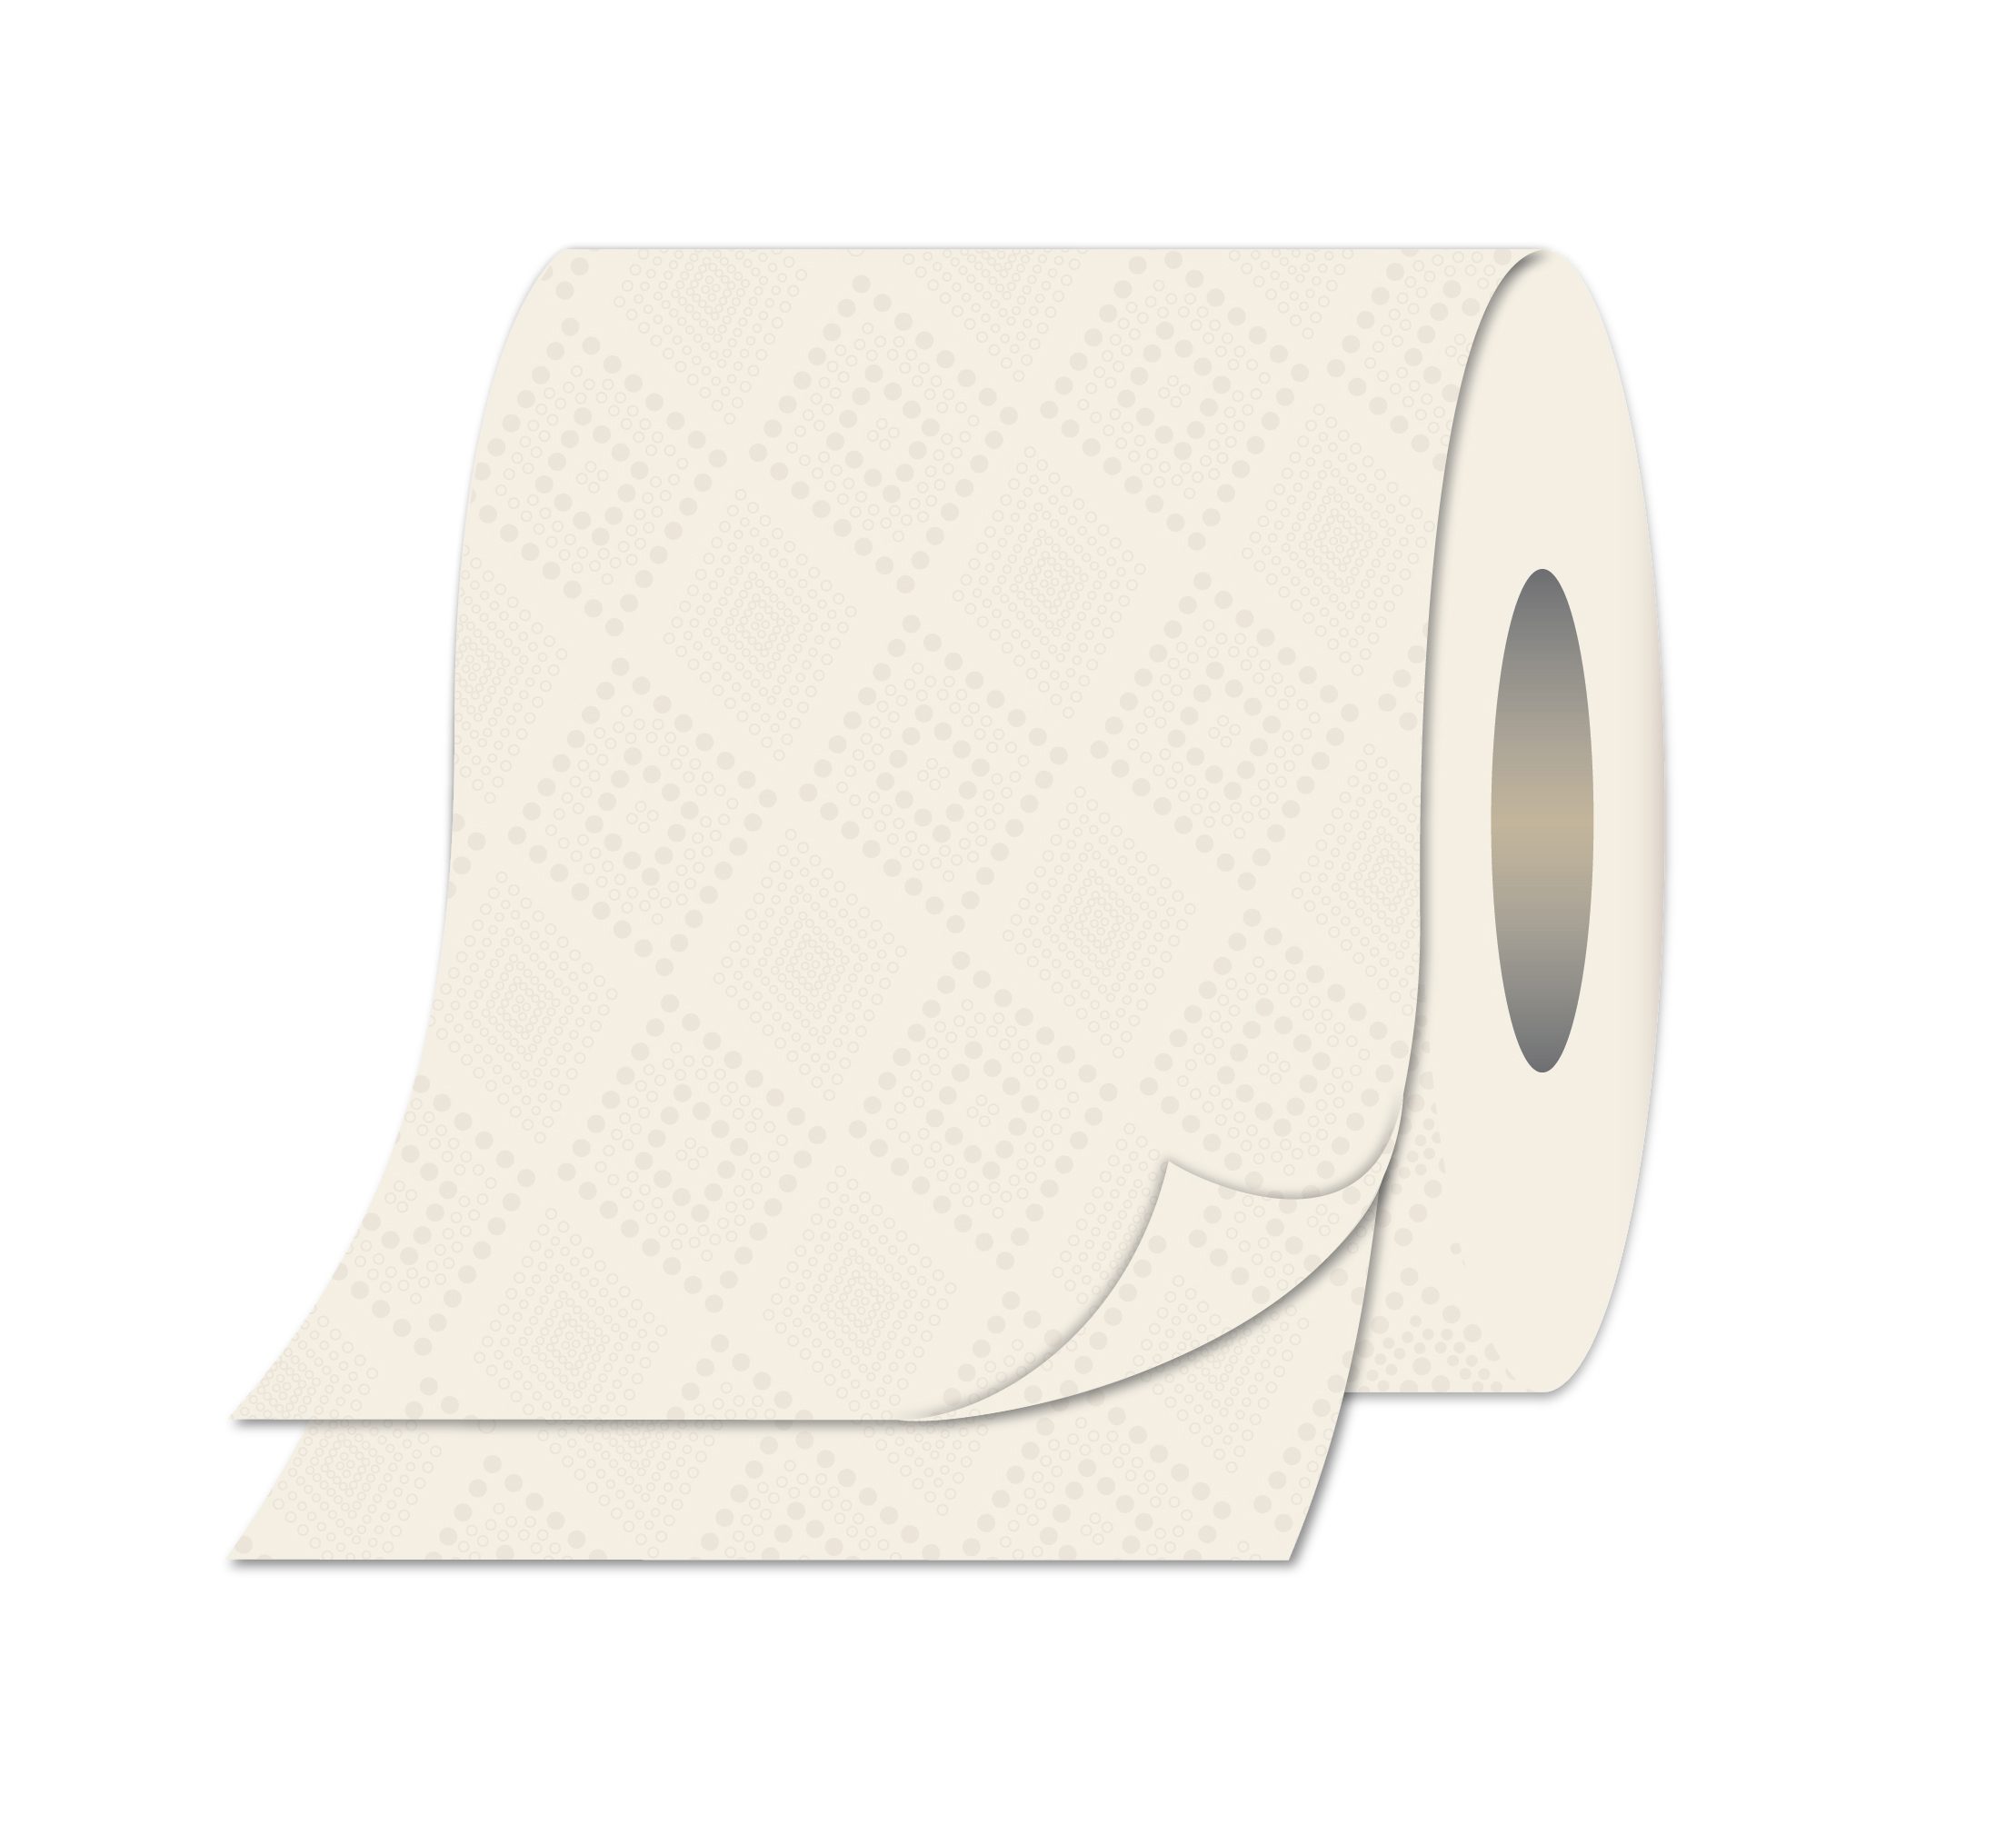 Bamboo Unbleached Eco Friendly 2ply Toilet Paper – 10 Packs of 4